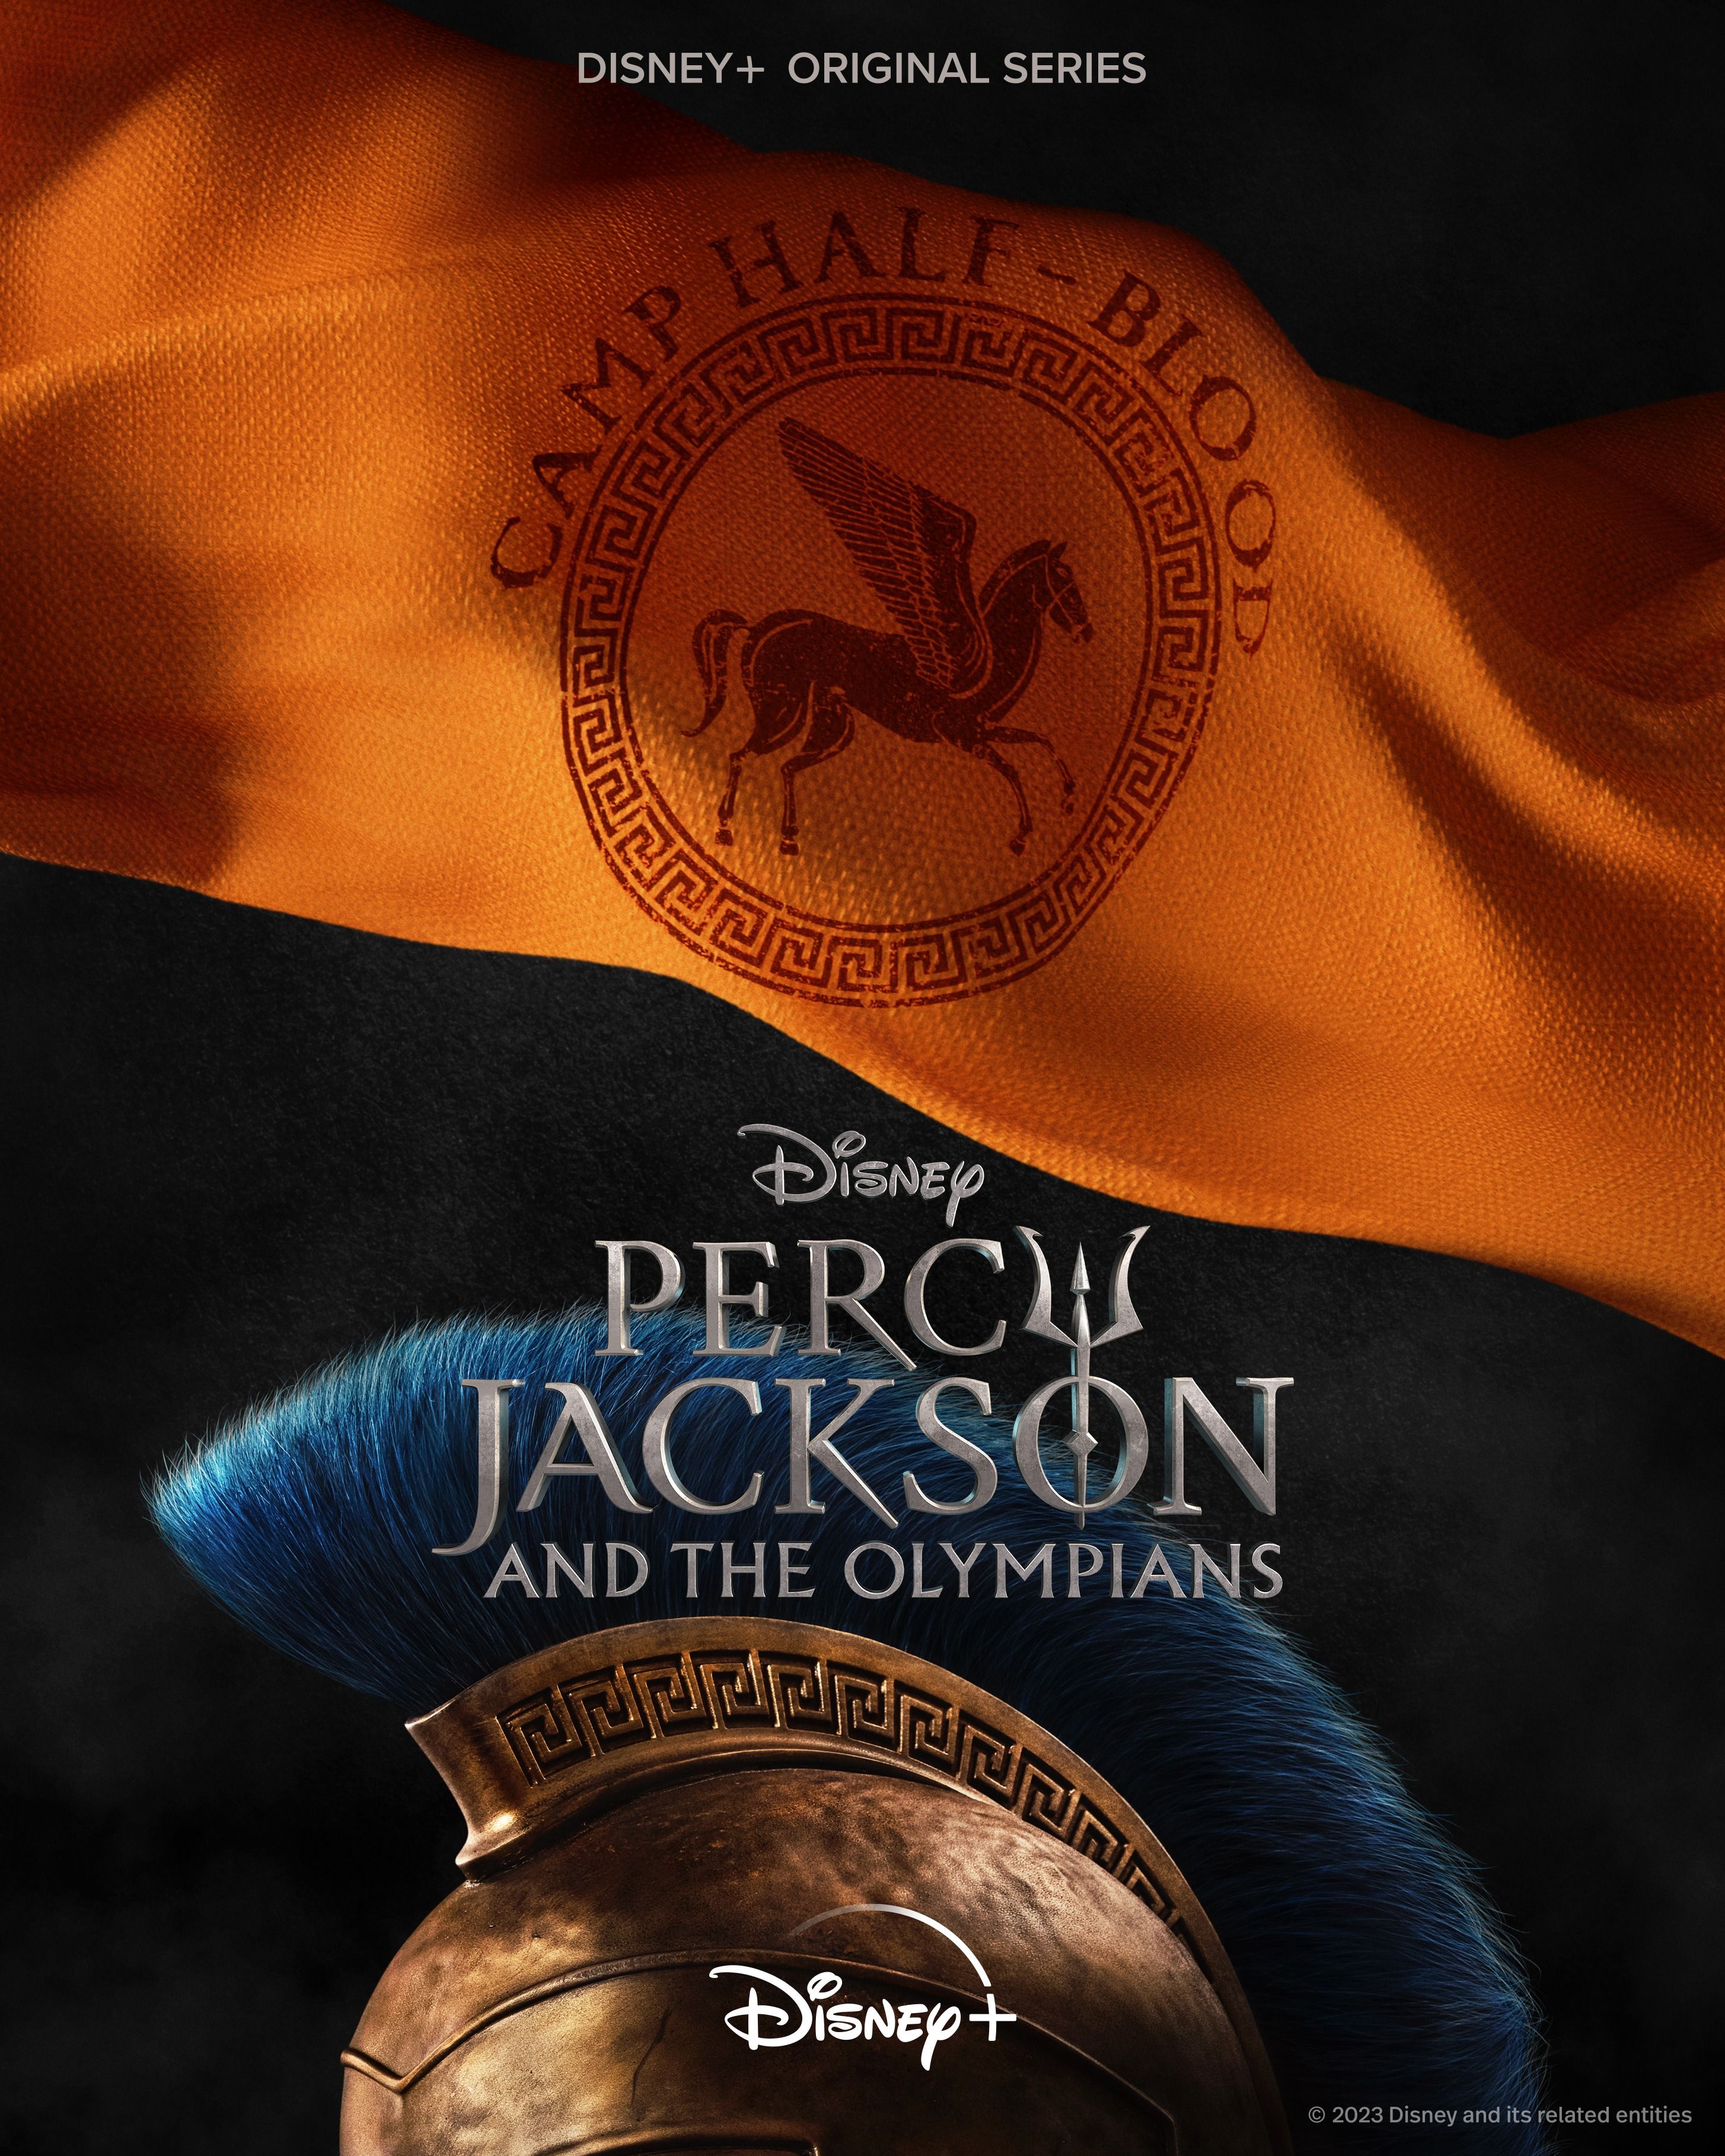 The first official poster for Disney+'s Percy Jackson and the Olympians